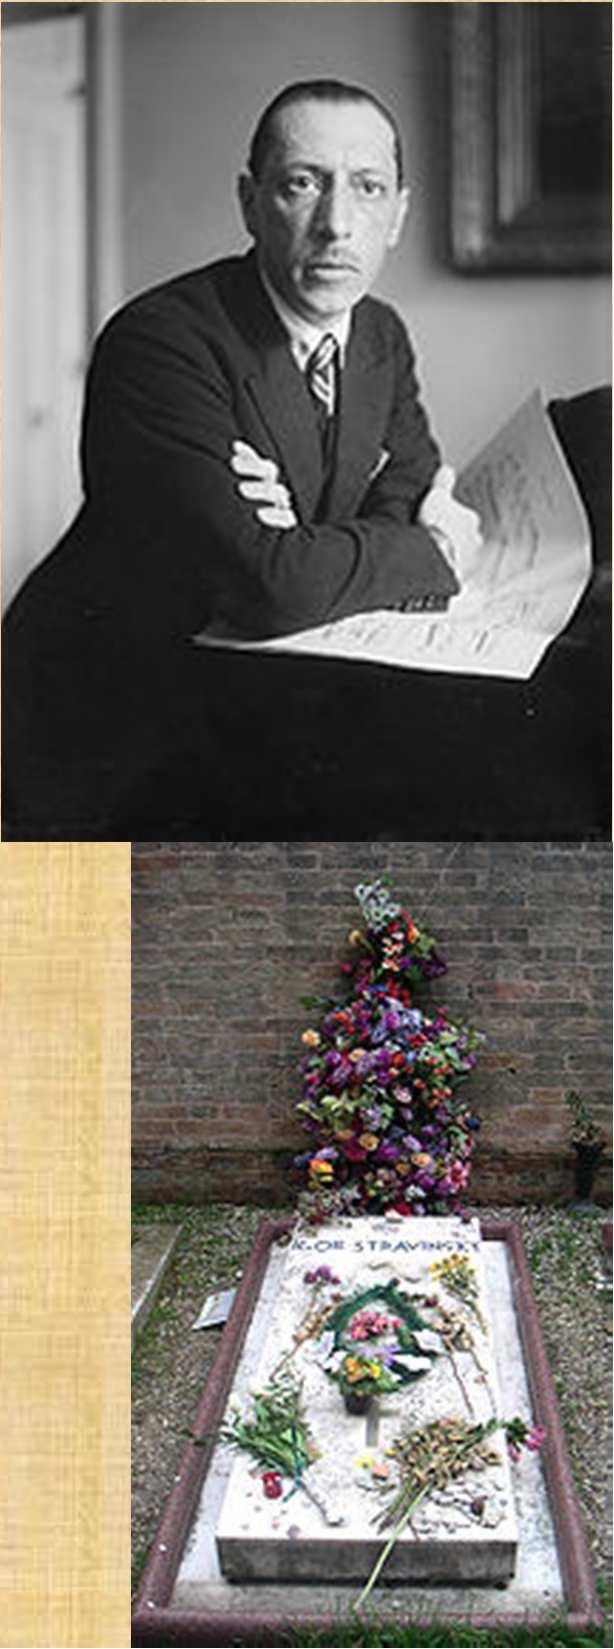 Igor Stravinsky June 5, 1882-April 6, 1971 Born in Russia, moved to France then moved to